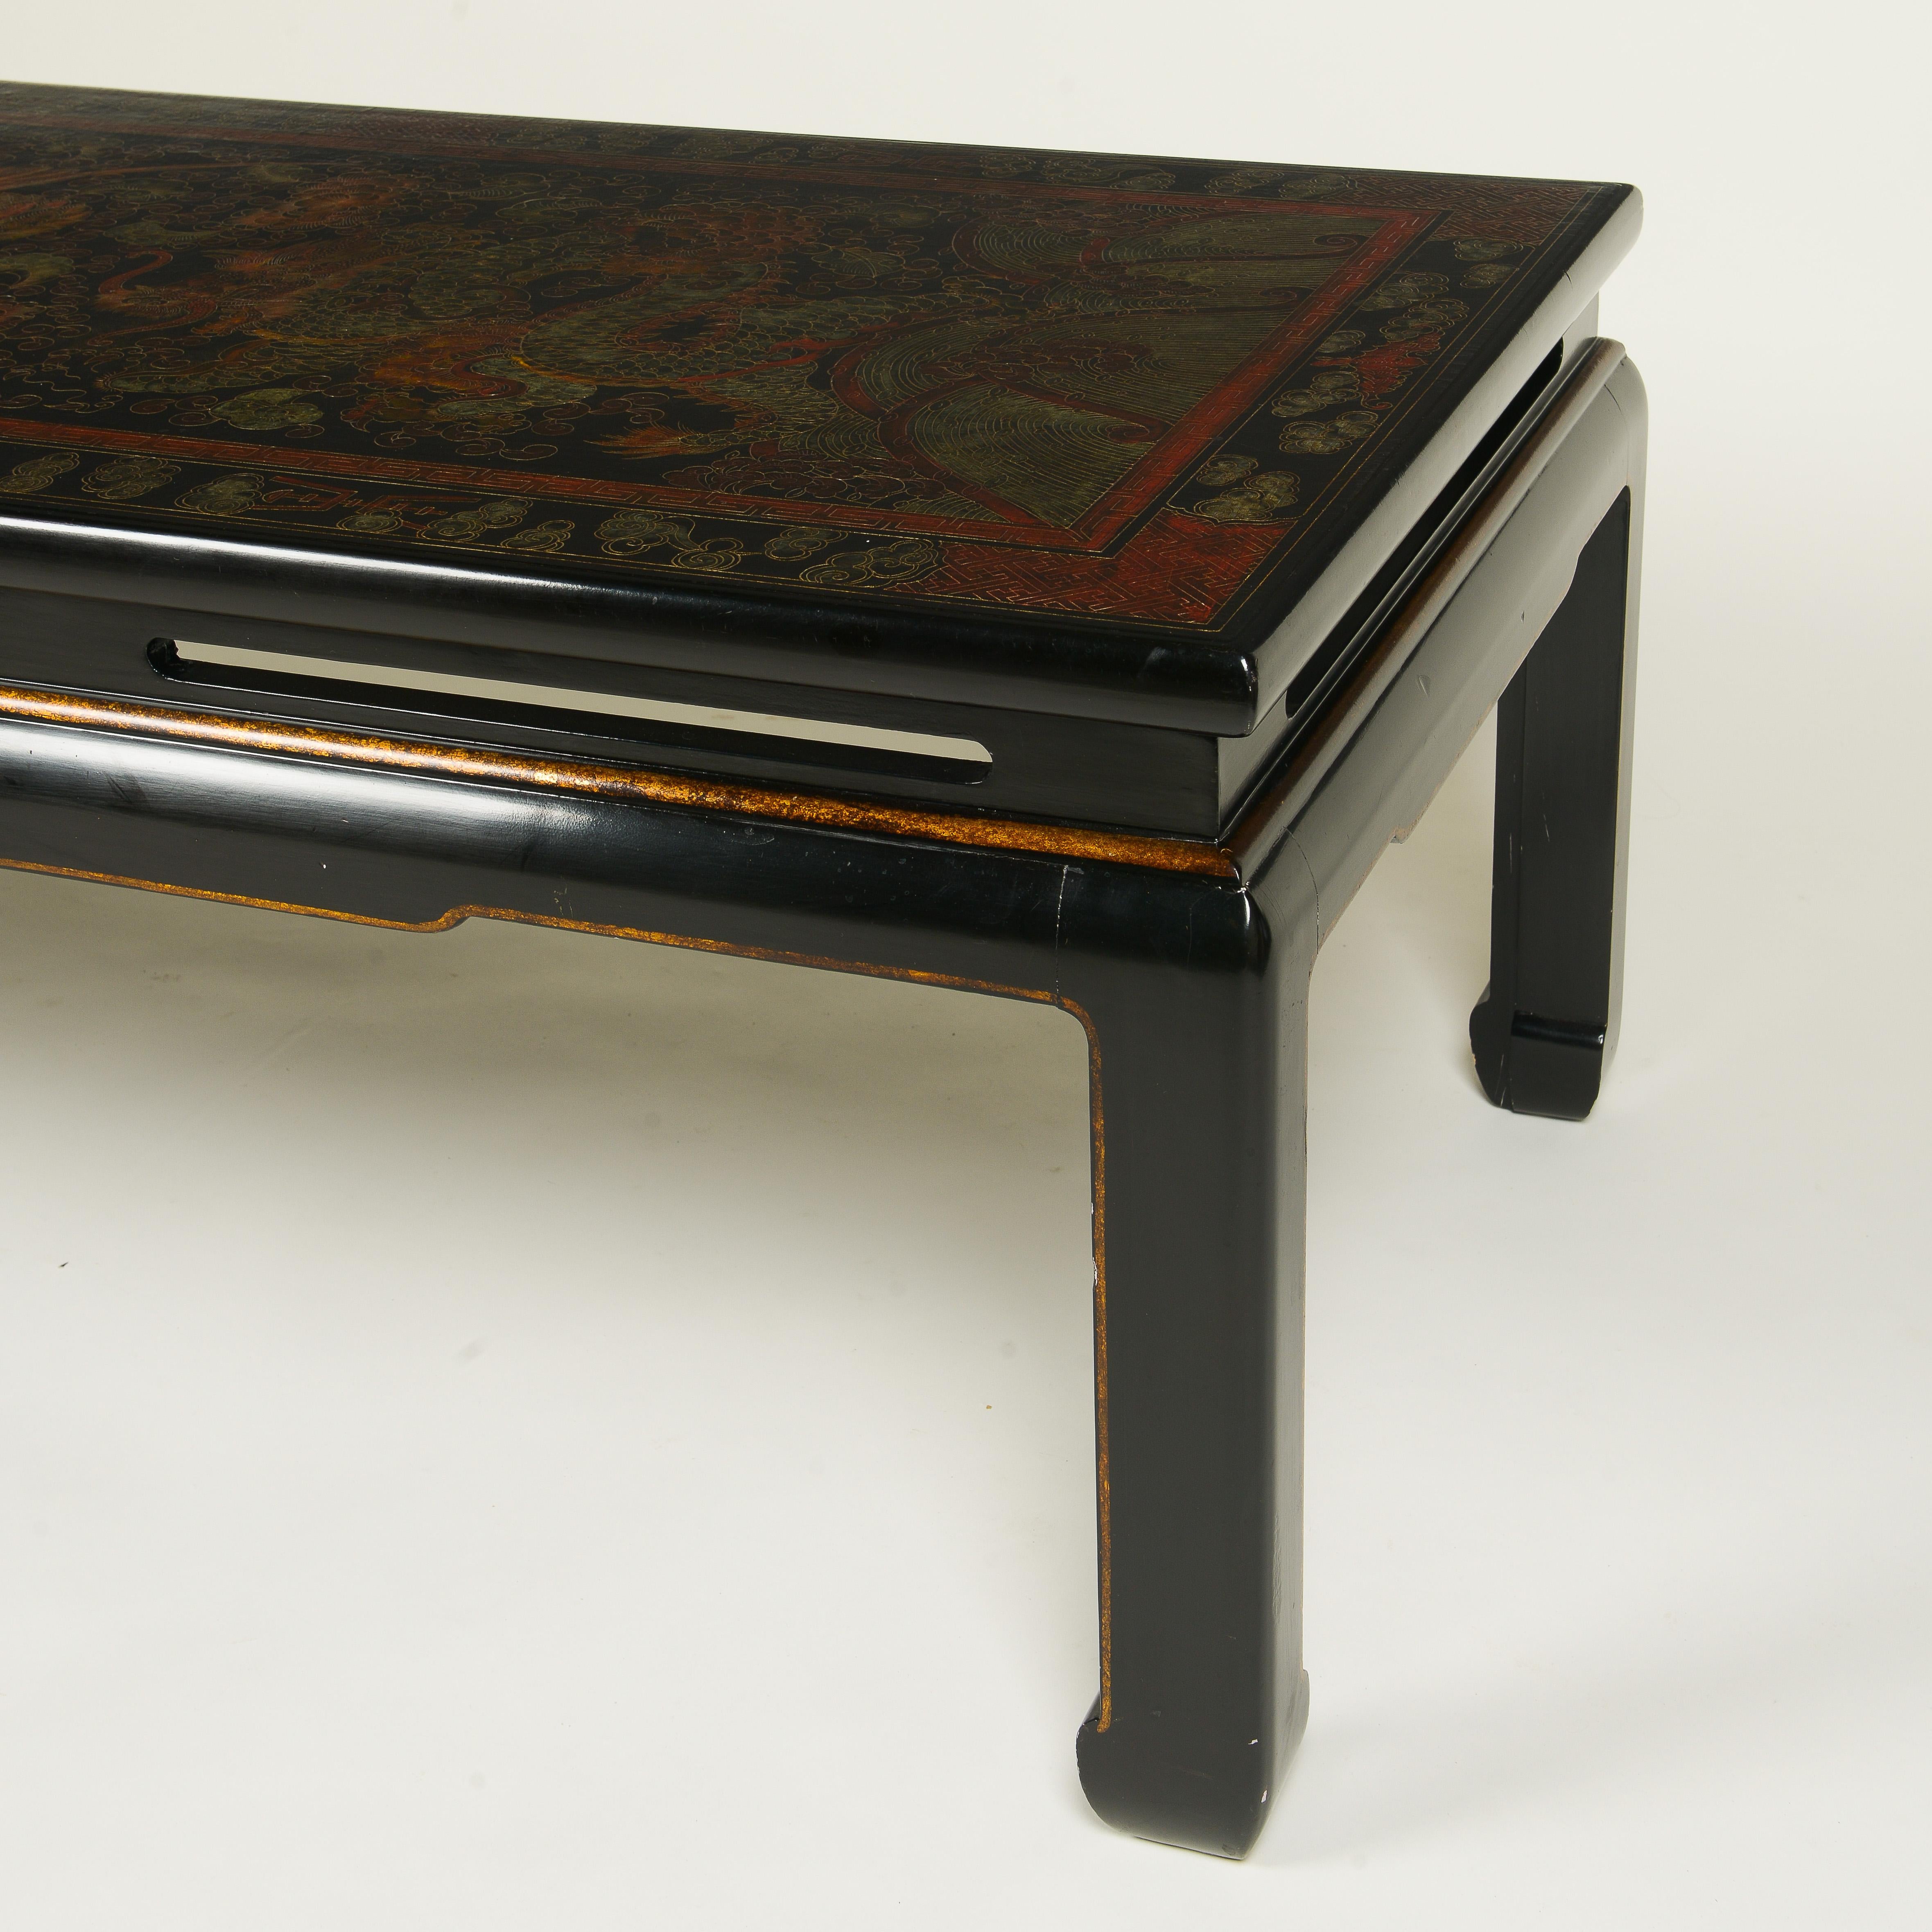 Dark Brown Coromandel Lacquer Coffee Table In Excellent Condition For Sale In New York, NY